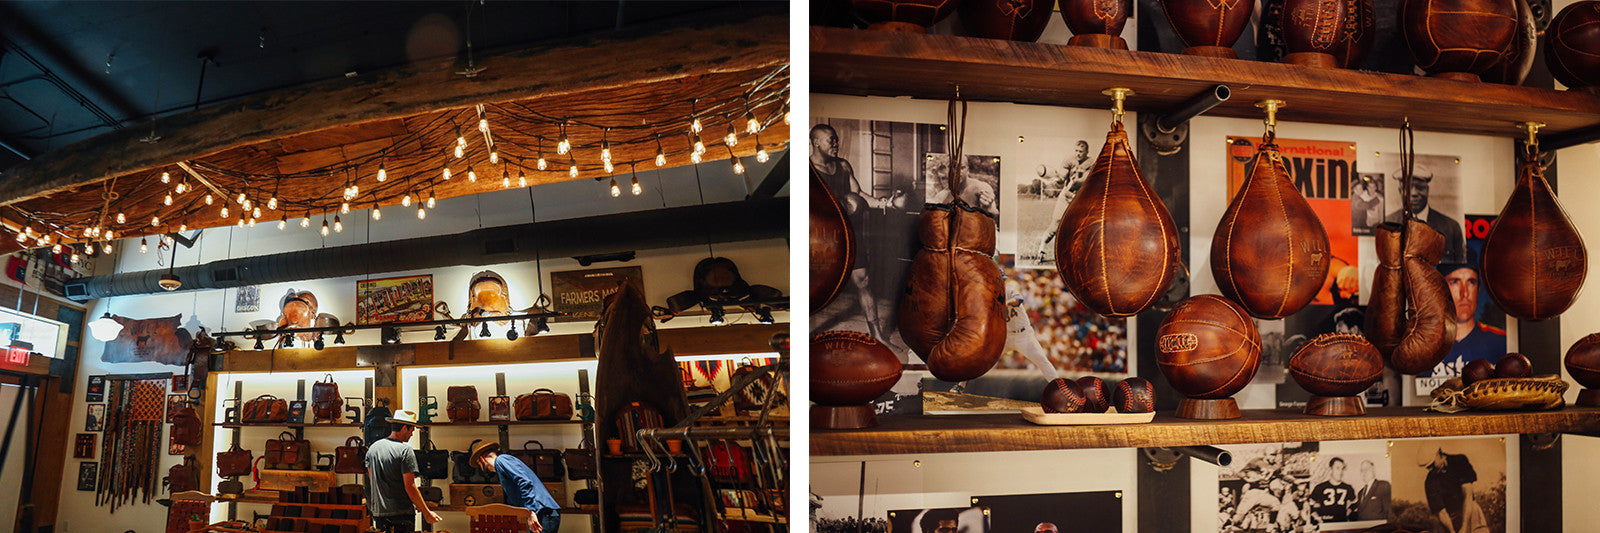 Austin Store Will Leather Goods